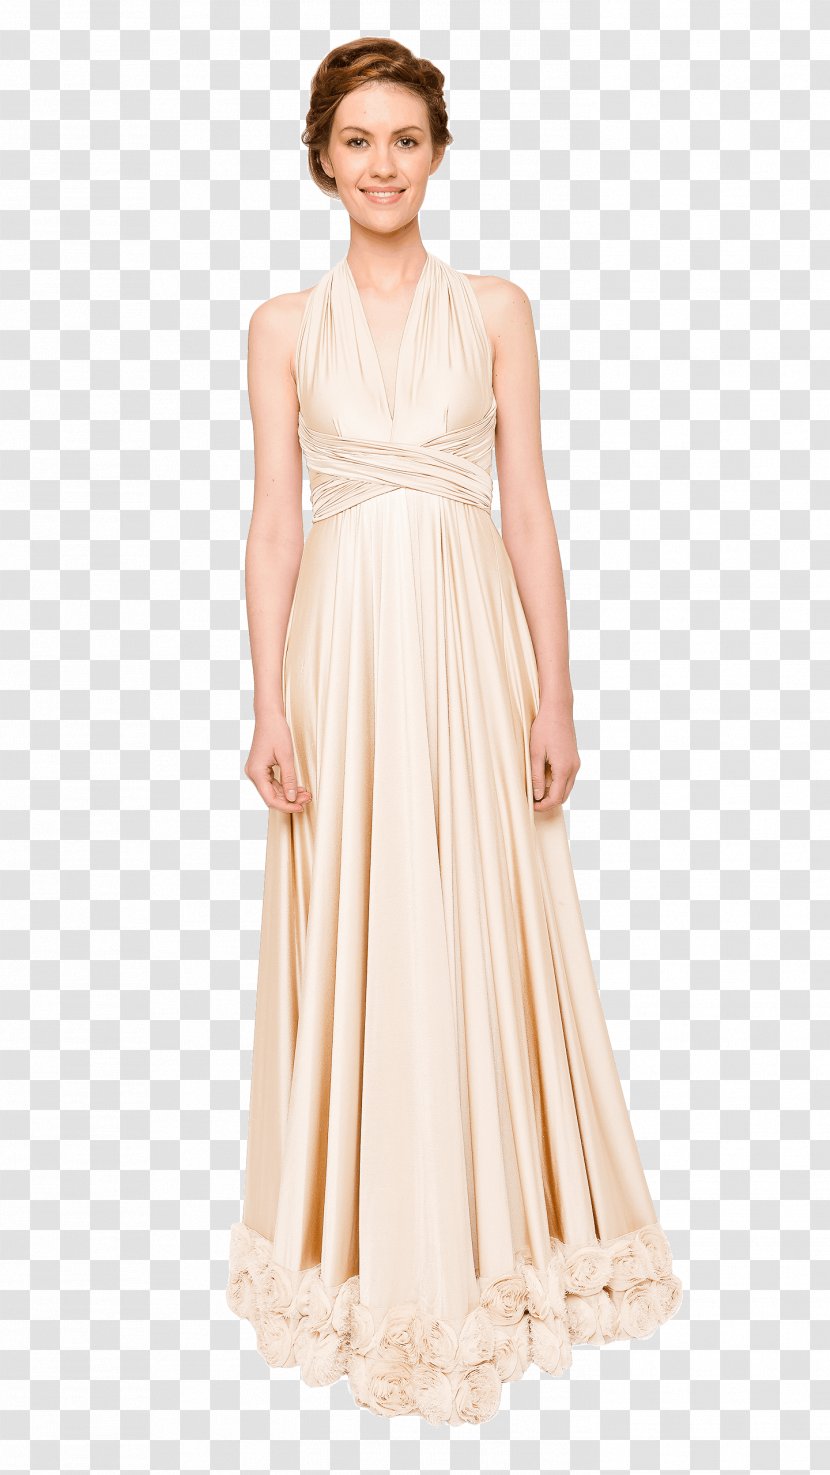 Wedding Dress Clothing Cocktail Formal Wear - Fashion Model - Maid Of Honor Transparent PNG